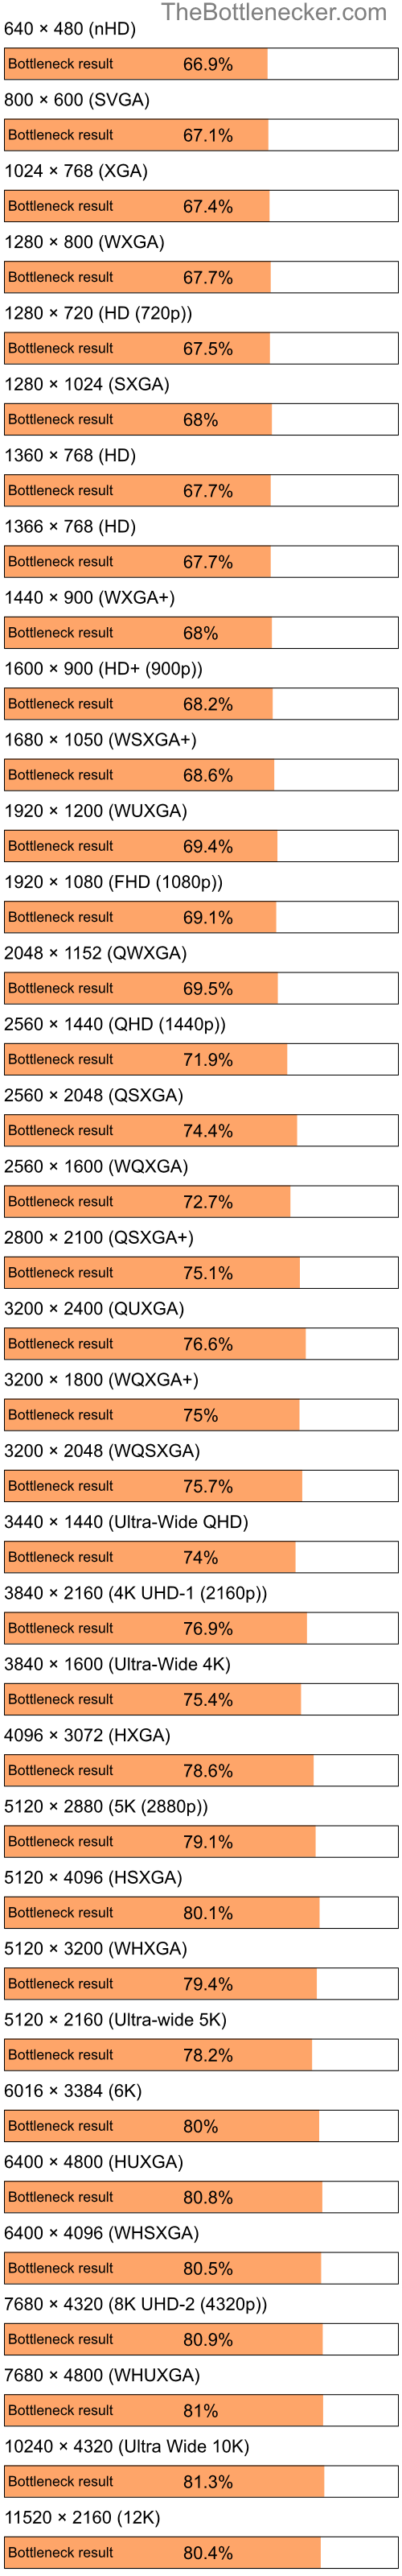 Bottleneck results by resolution for Intel Atom N280 and AMD Mobility Radeon HD 2300 in Processor Intense Tasks